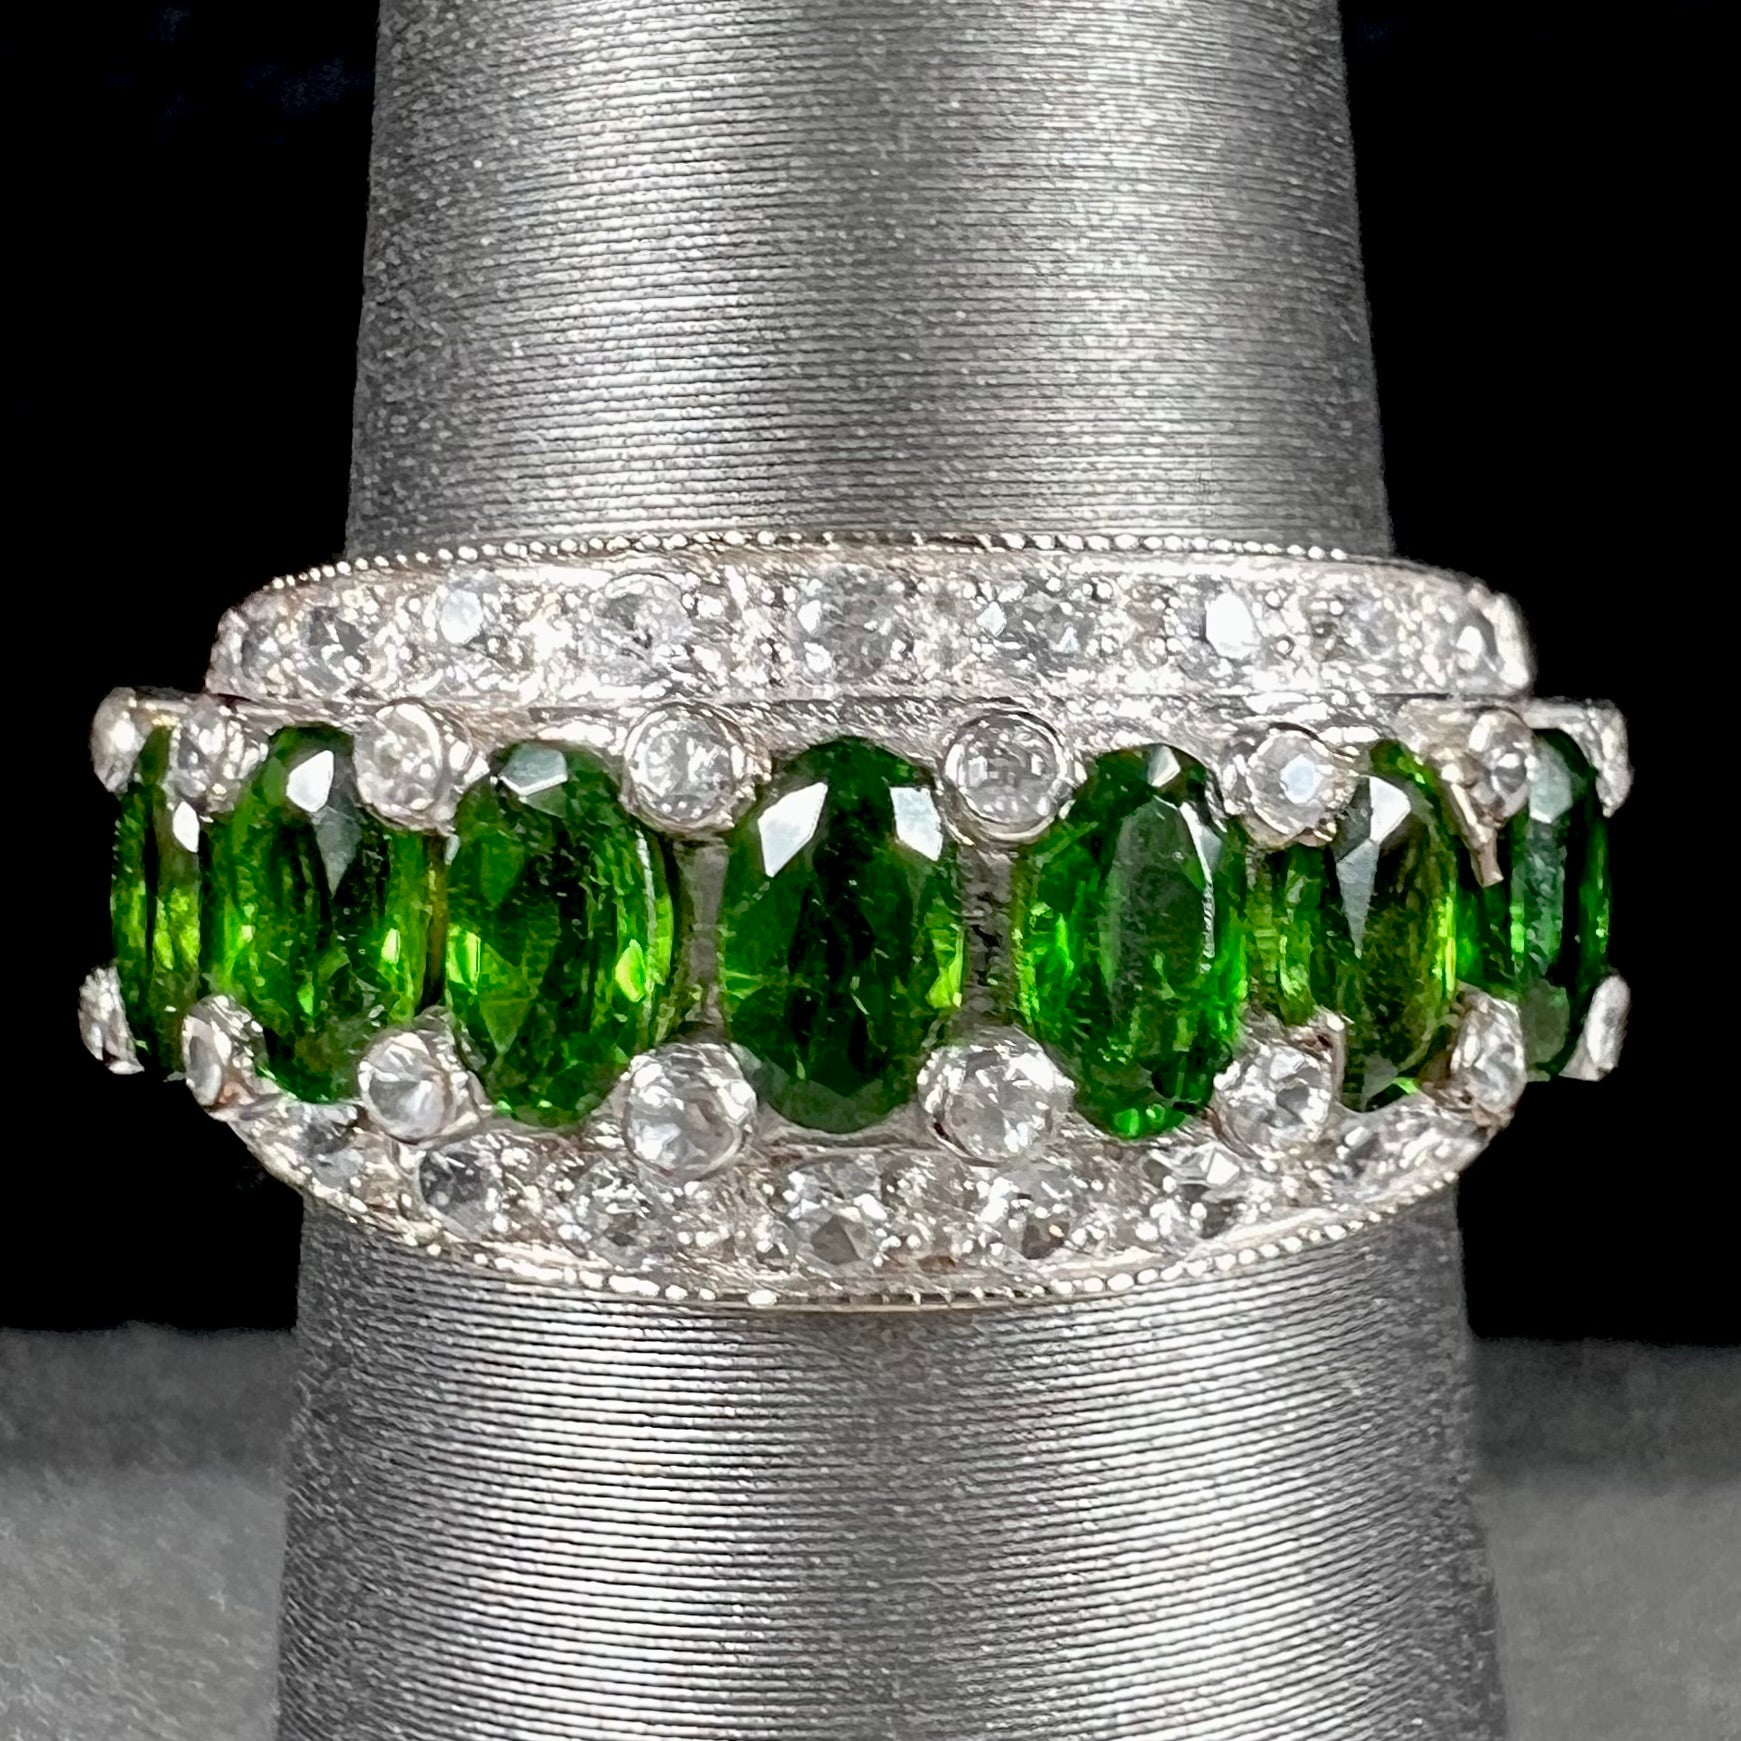 A ladies' two-tone white and yellow gold ring set withseven oval cut chrome diopside stones and cubic zirconia accents.